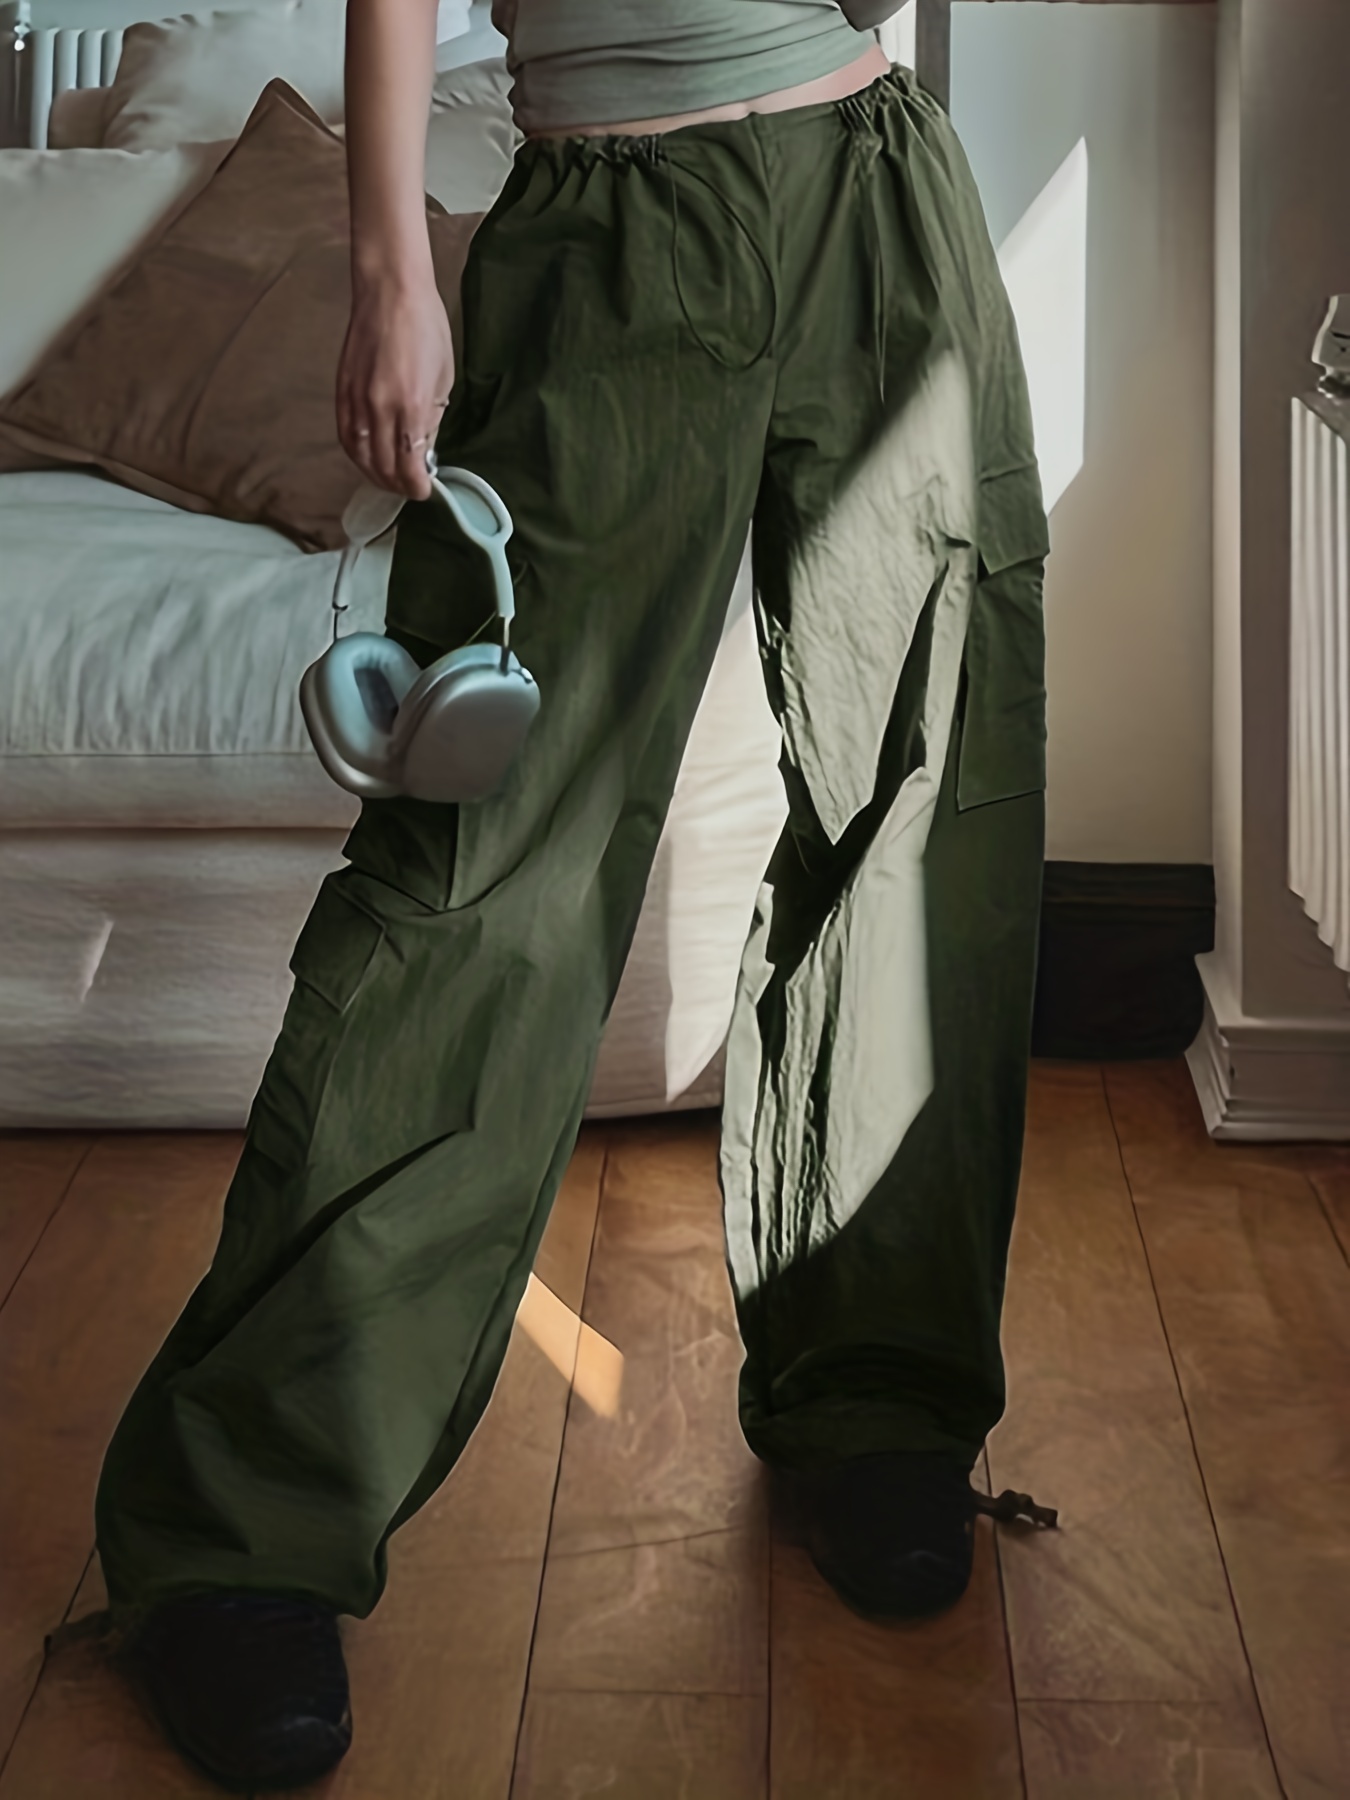 In the Streets Parachute Cargo Pants, Olive – Season 7 Boutique